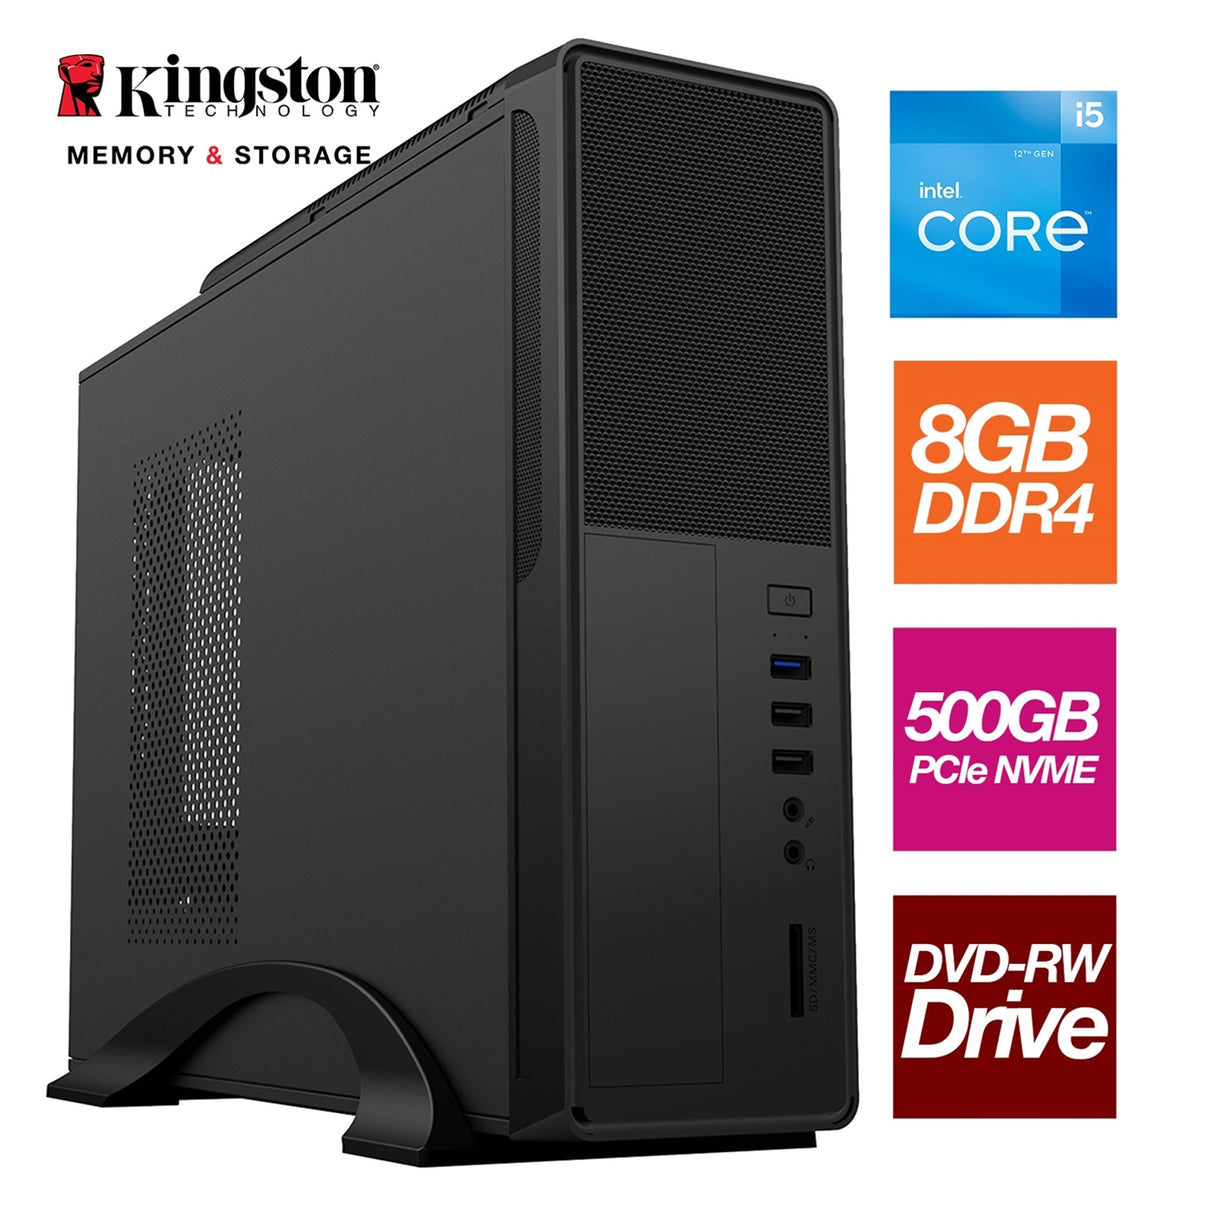 Small Form Factor - Intel i5 12400 6 Core 12 Threads 2.50GHz (4.40GHz Boost), 8GB Kingston RAM, 500GB Kingston NVMe M.2,DVDRW Optical, with Wi-Fi 6 - Small Foot Print for Home or Office Use - Pre-Built PC